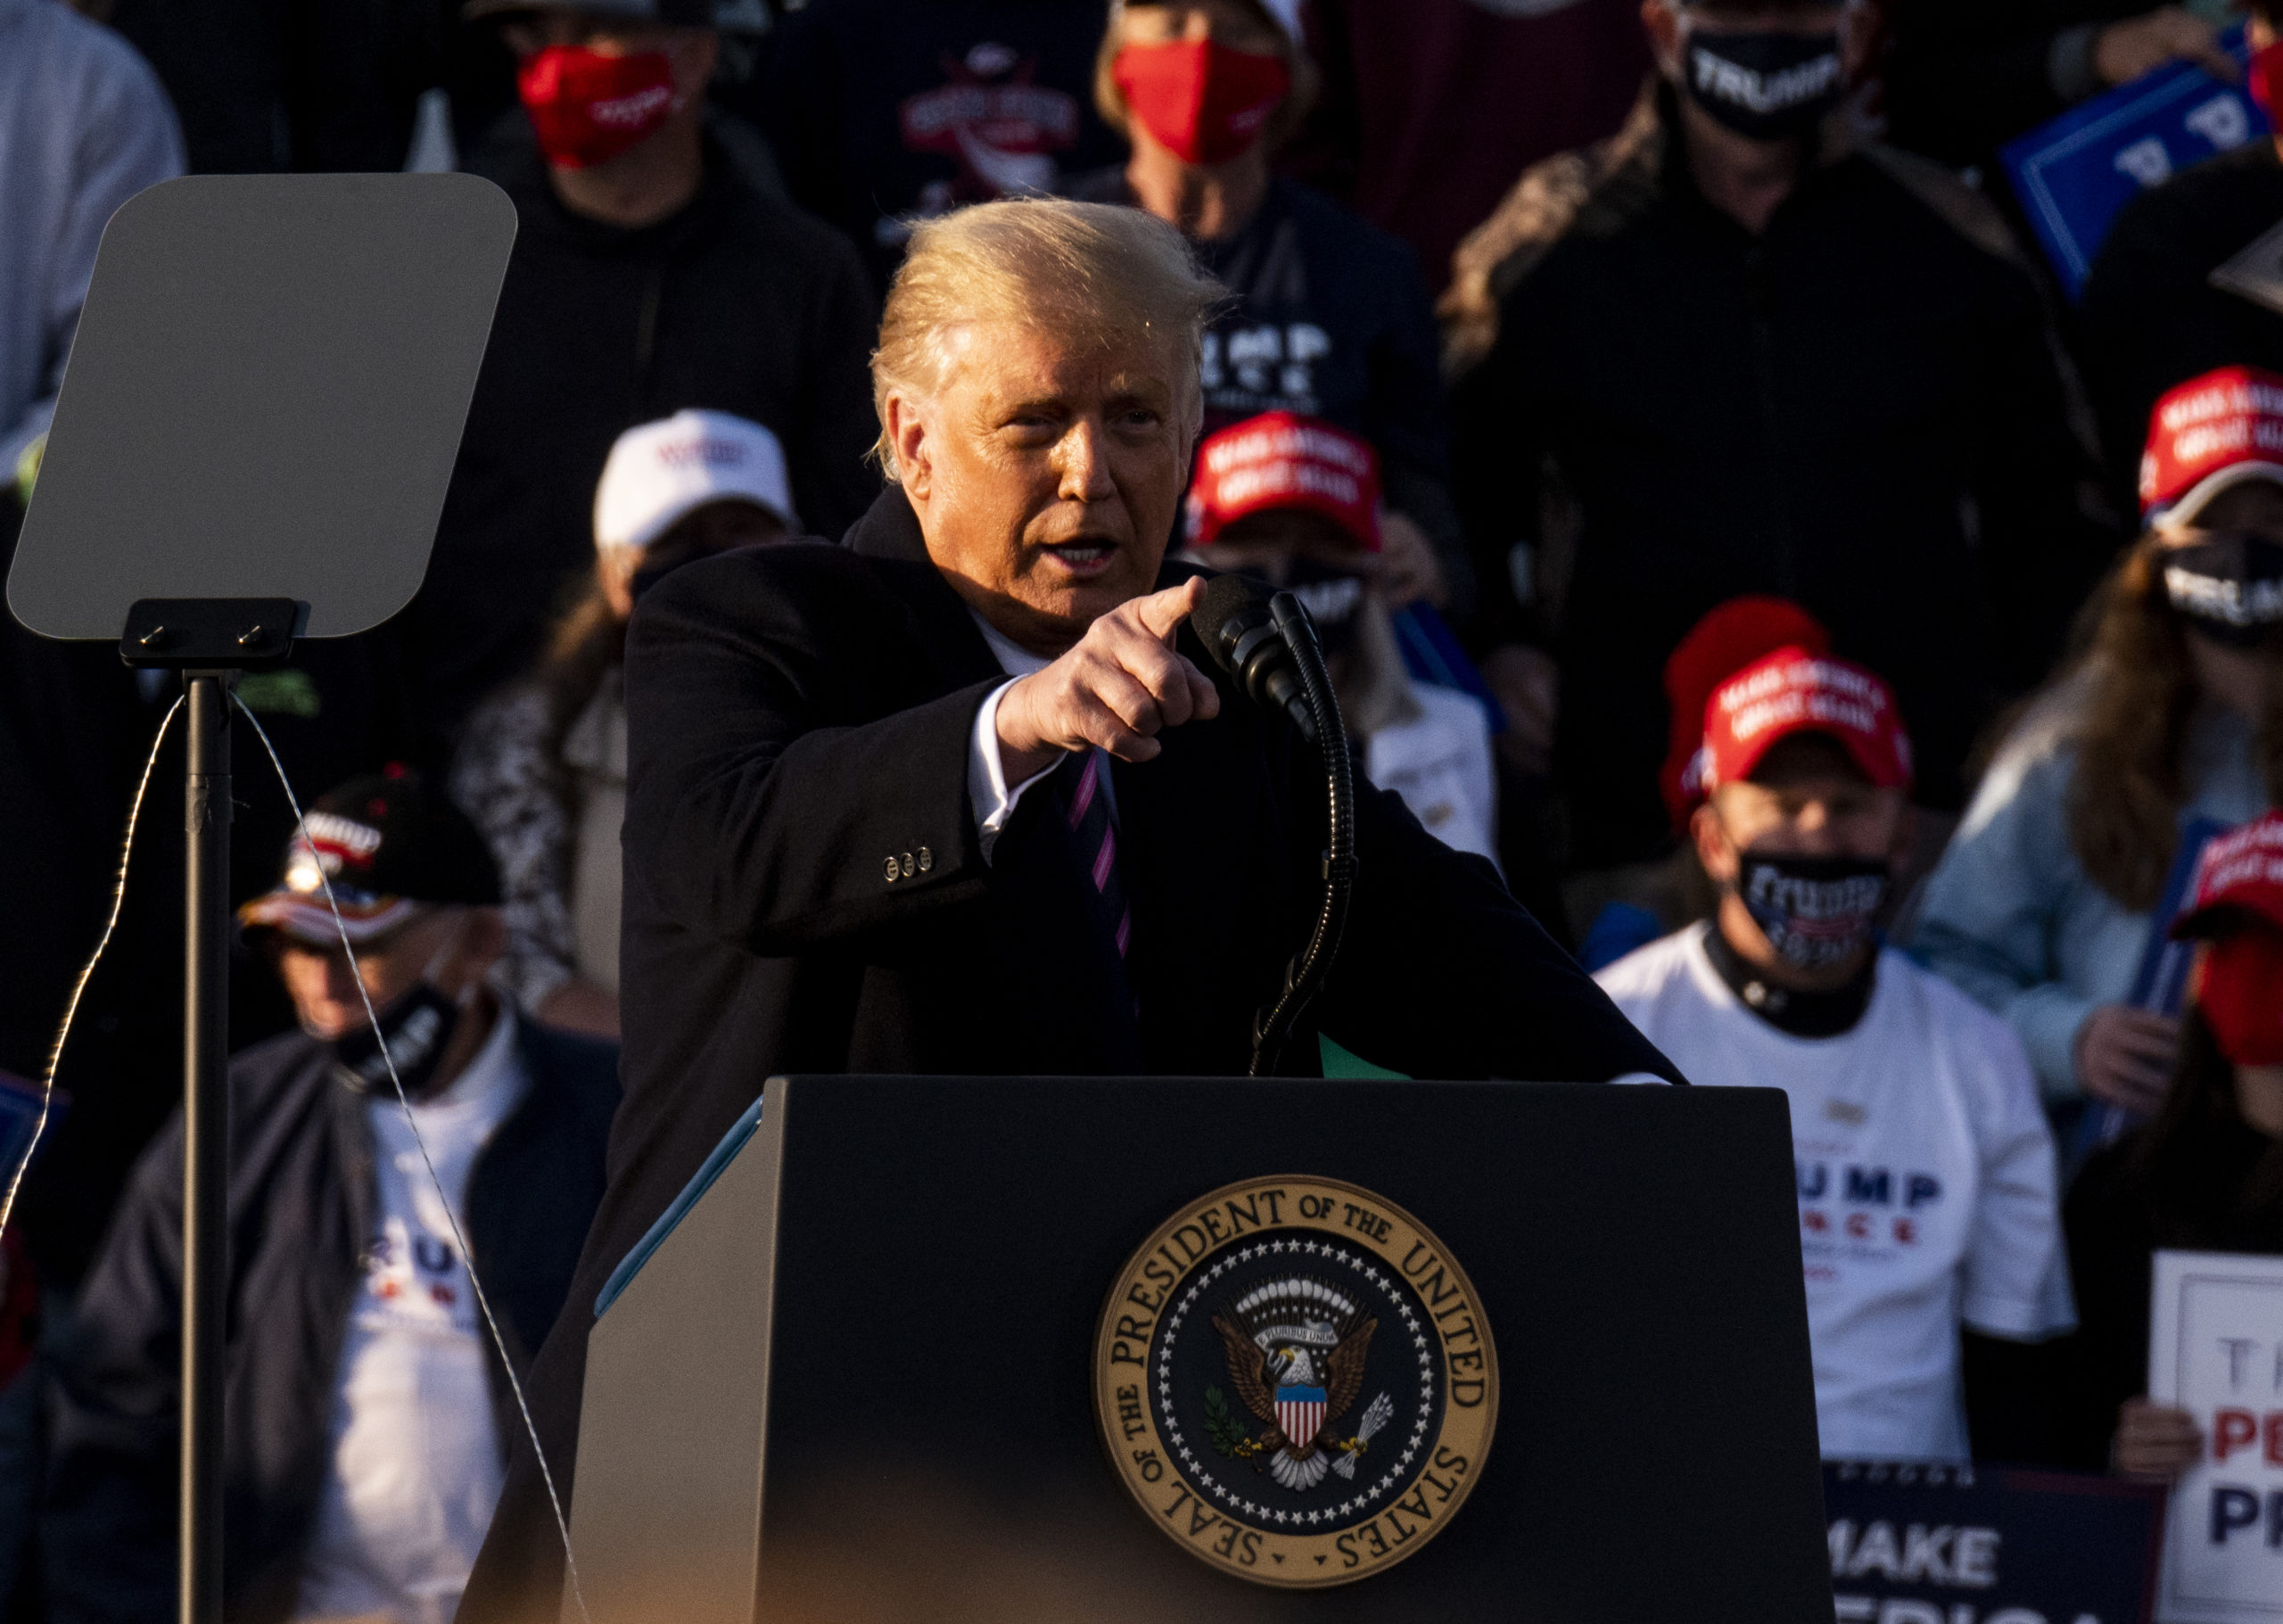 BEMIDJI, MN - SEPTEMBER 18: President Donald Trump speaks to supporters during a rally at the Bemidji Regional Airport on September 18, 2020 in Bemidji, Minnesota. Trump and challenger, Democratic presidential nominee and former Vice President Joe Biden, are both campaigning in Minnesota today. (Photo by Stephen Maturen/Getty Images)